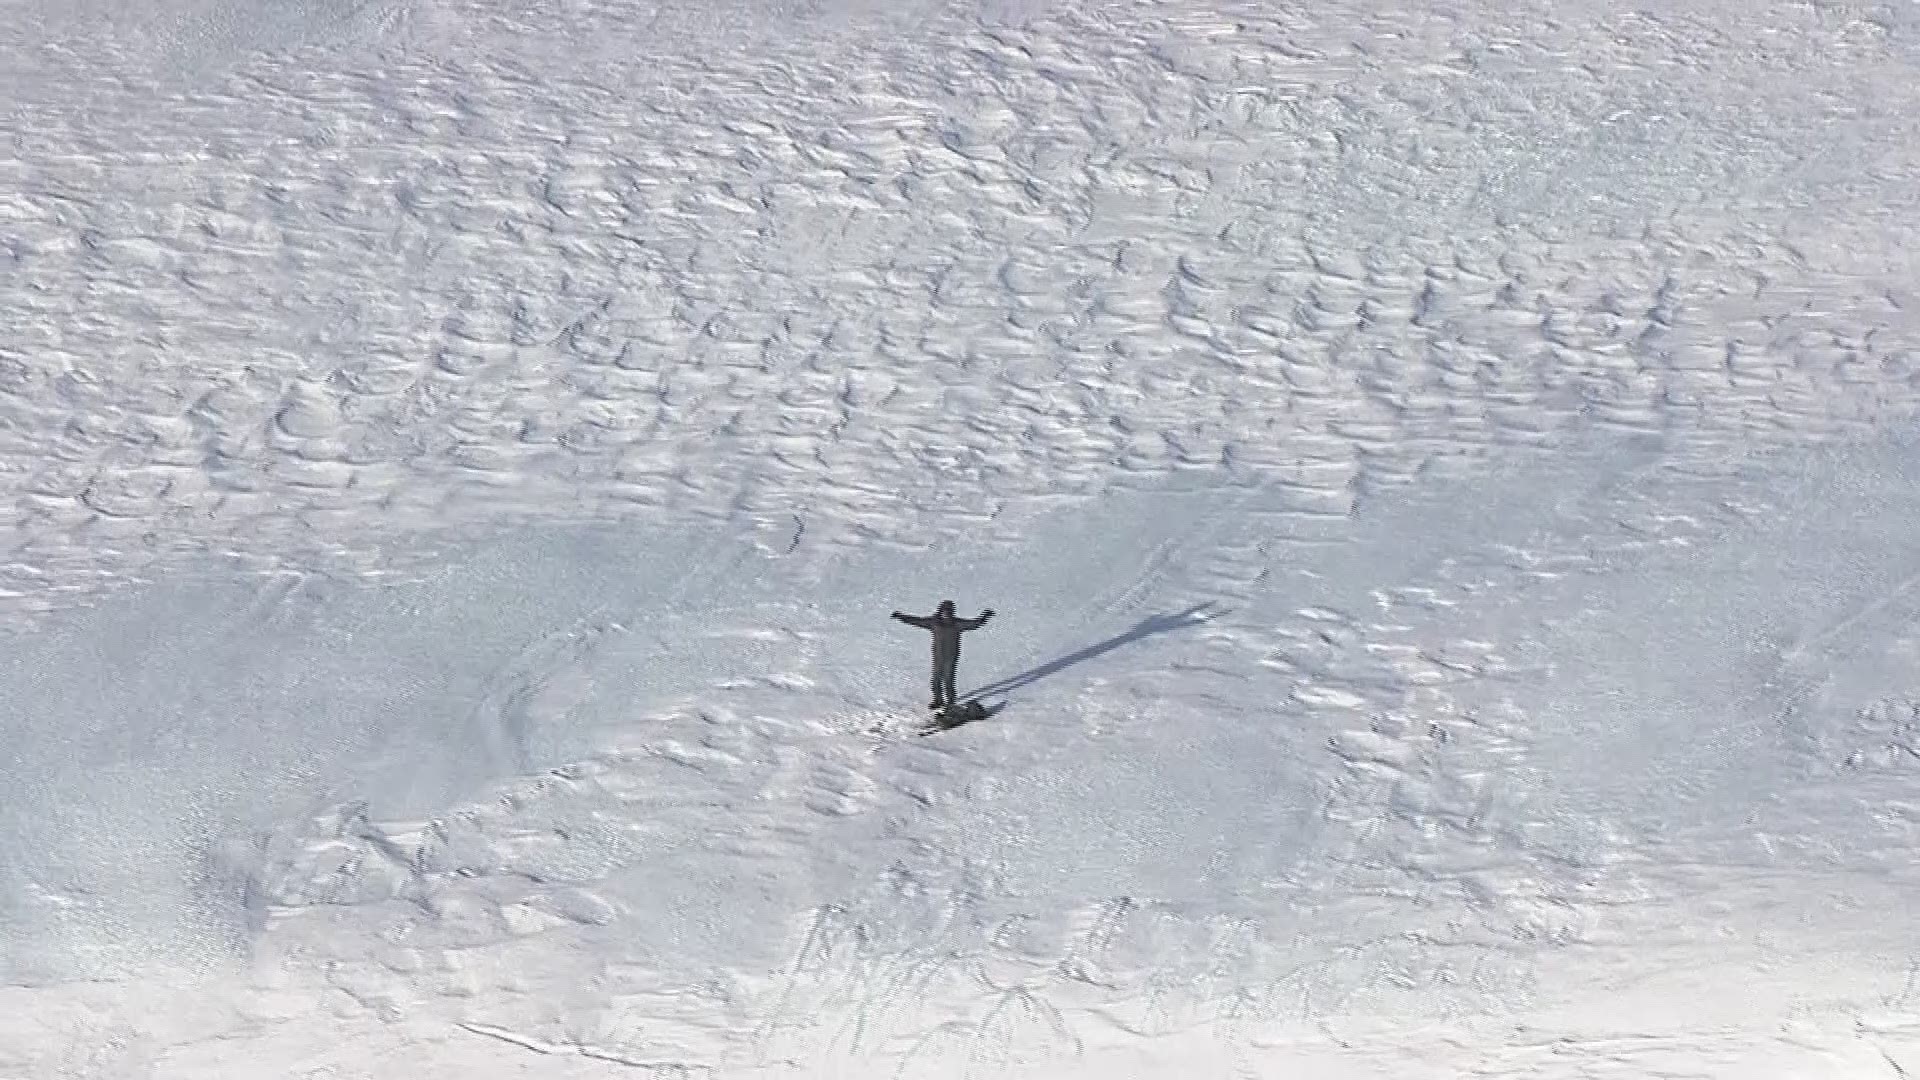 KGW's helicopter Sky 8 spots a lost climber on Mount Hood on Jan. 15, 2019.